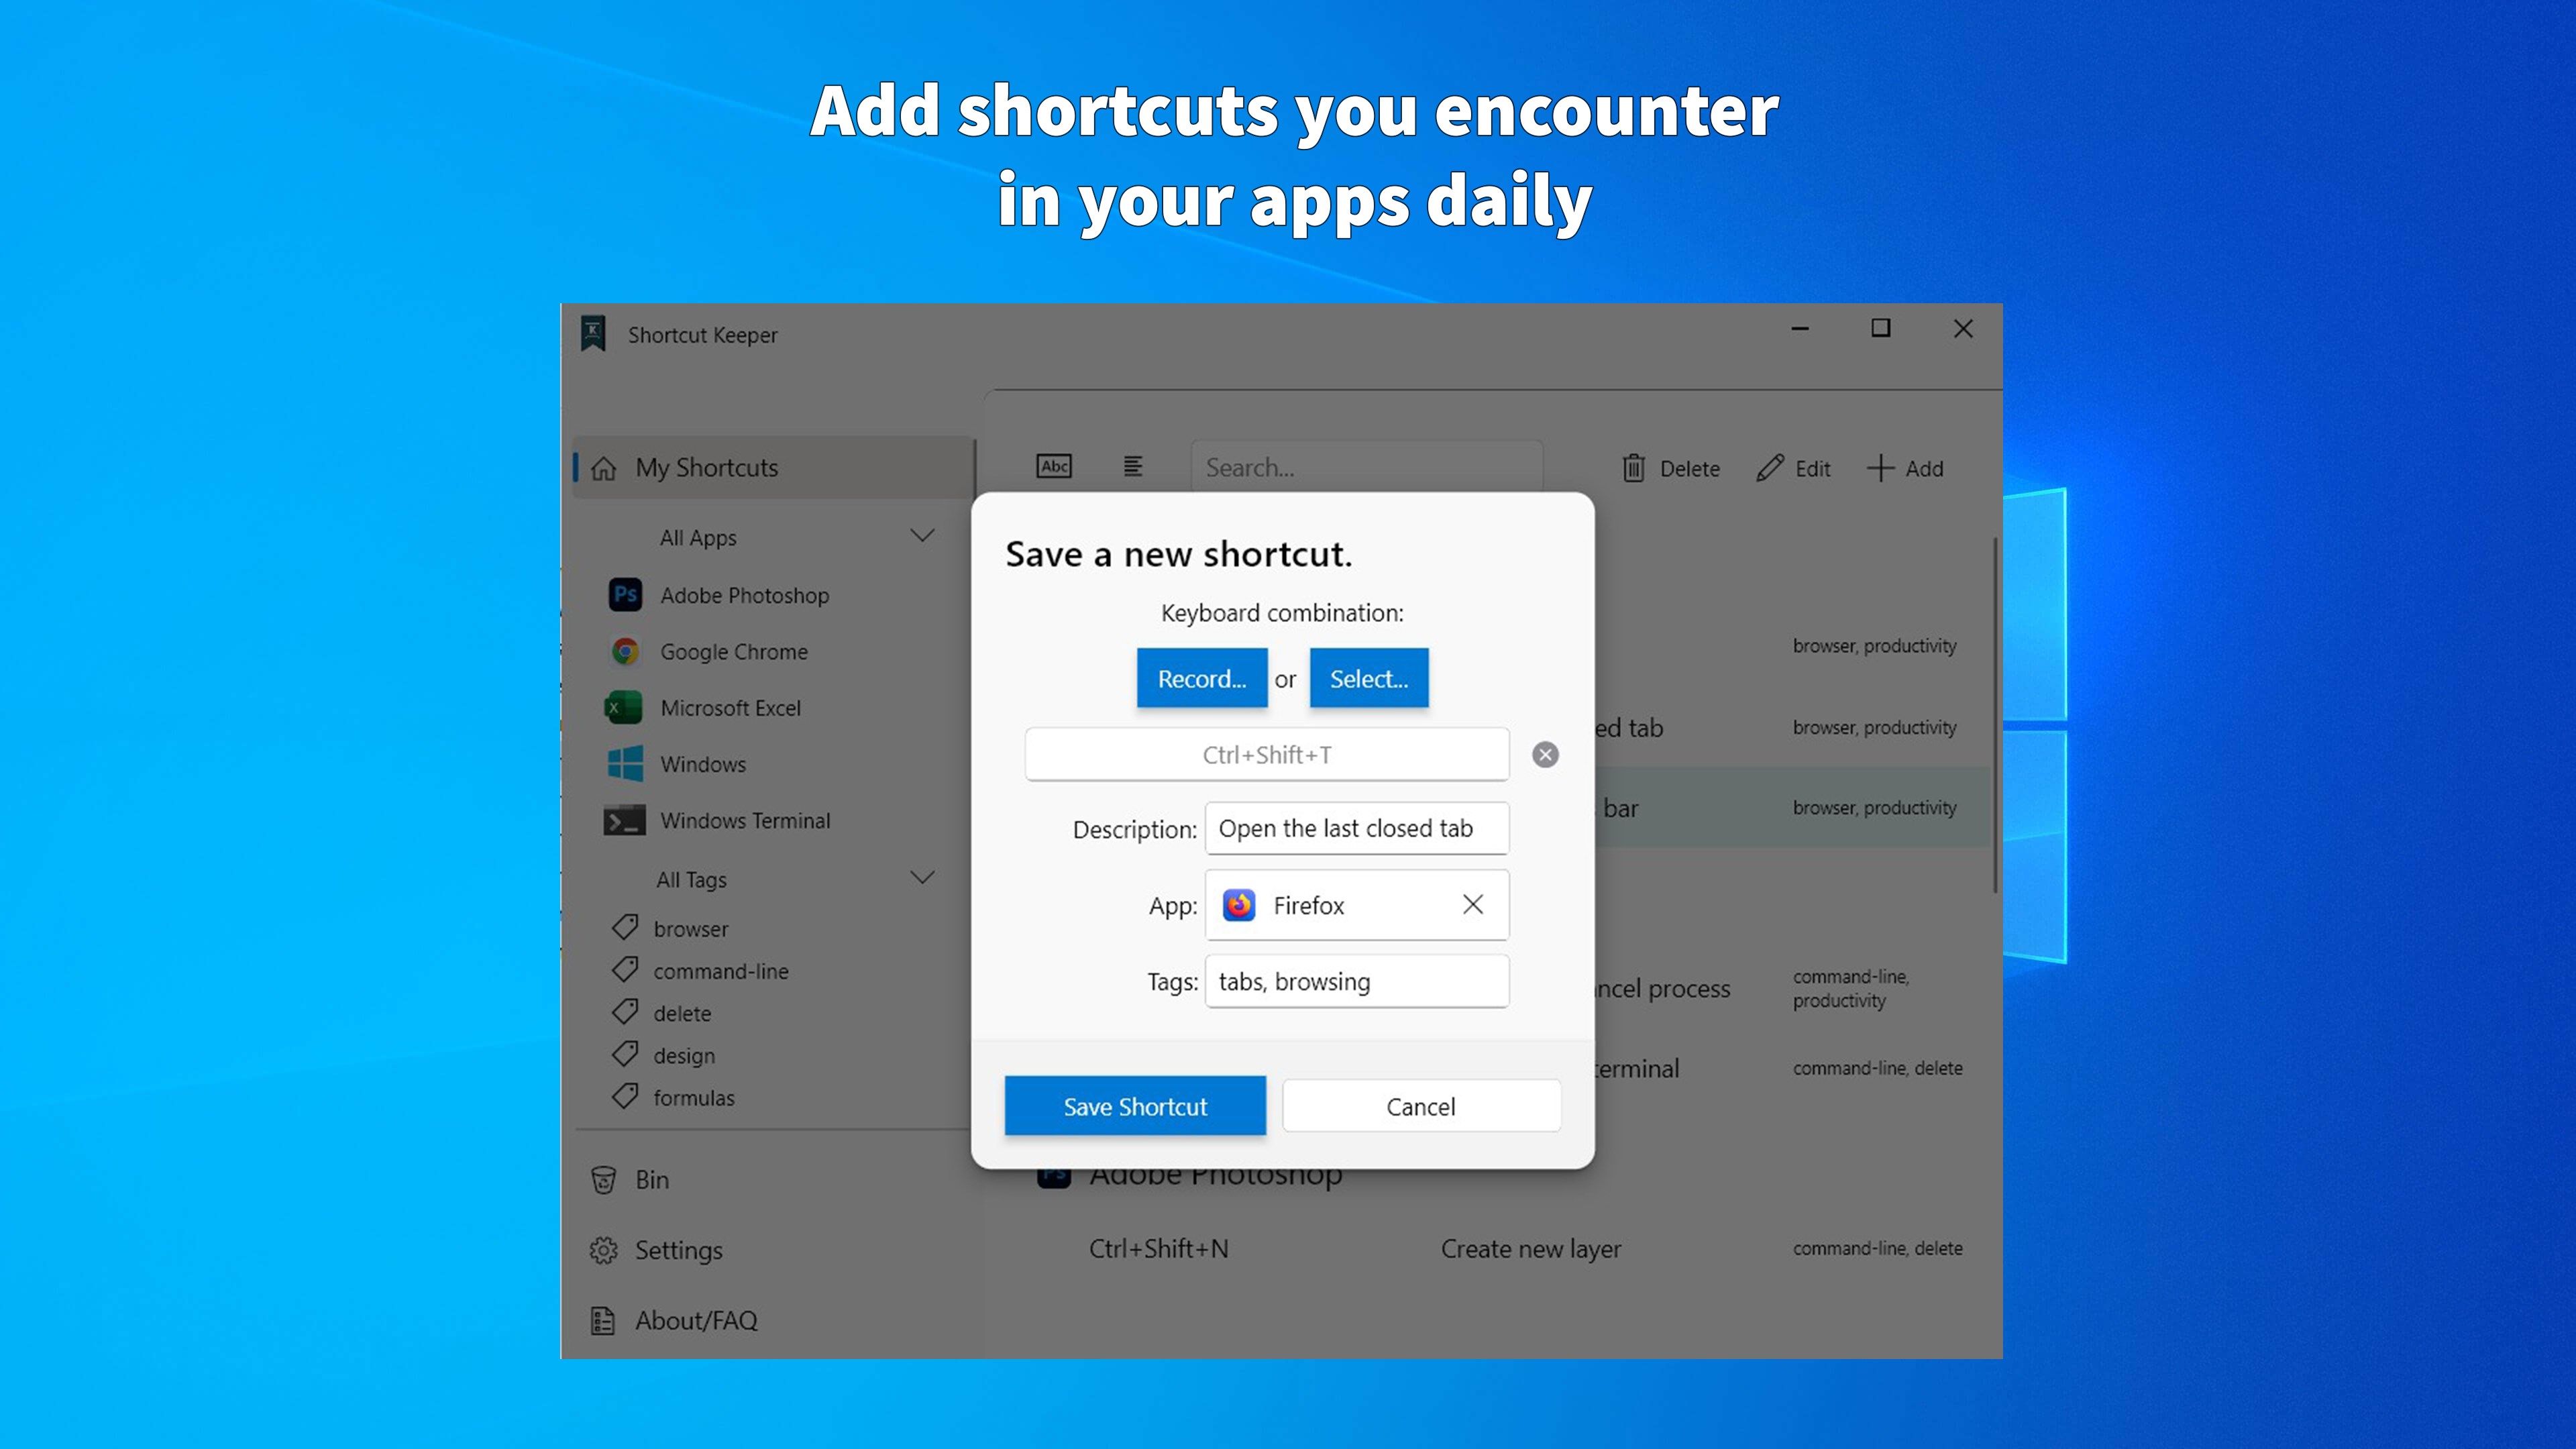 Add shortcuts you encounter daily in your apps